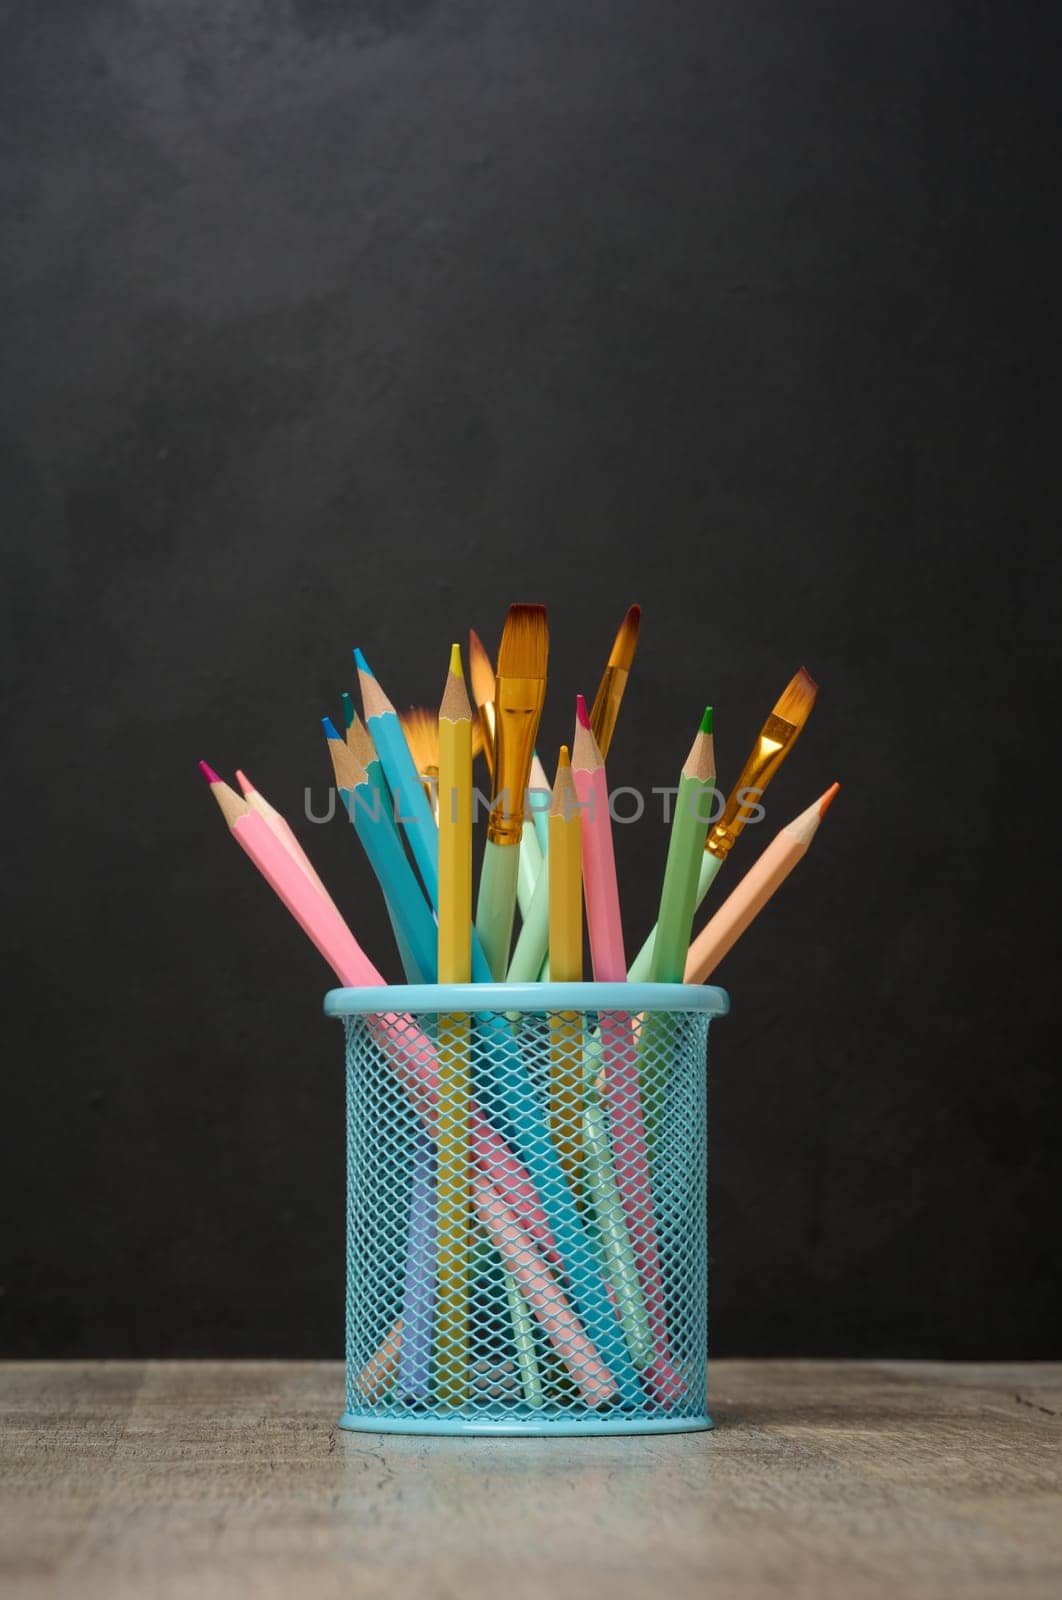 Multi-colored wooden pencils on a black chalk board background